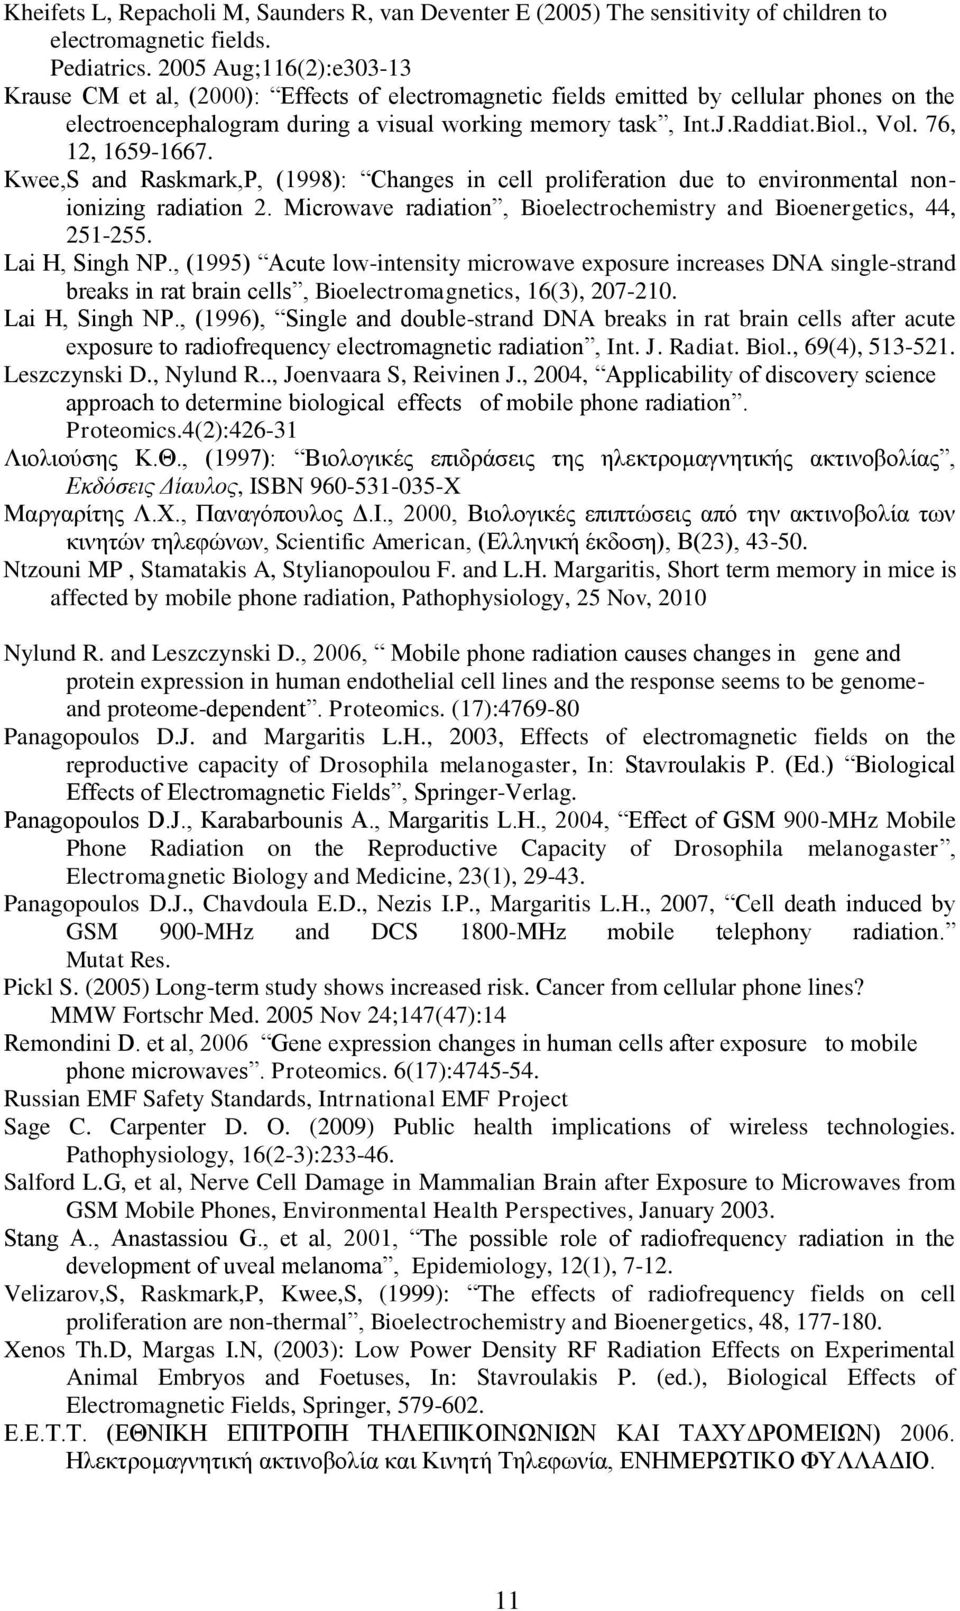 76, 12, 1659-1667. Kwee,S and Raskmark,P, (1998): Changes in cell proliferation due to environmental nonionizing radiation 2. Microwave radiation, Bioelectrochemistry and Bioenergetics, 44, 251-255.